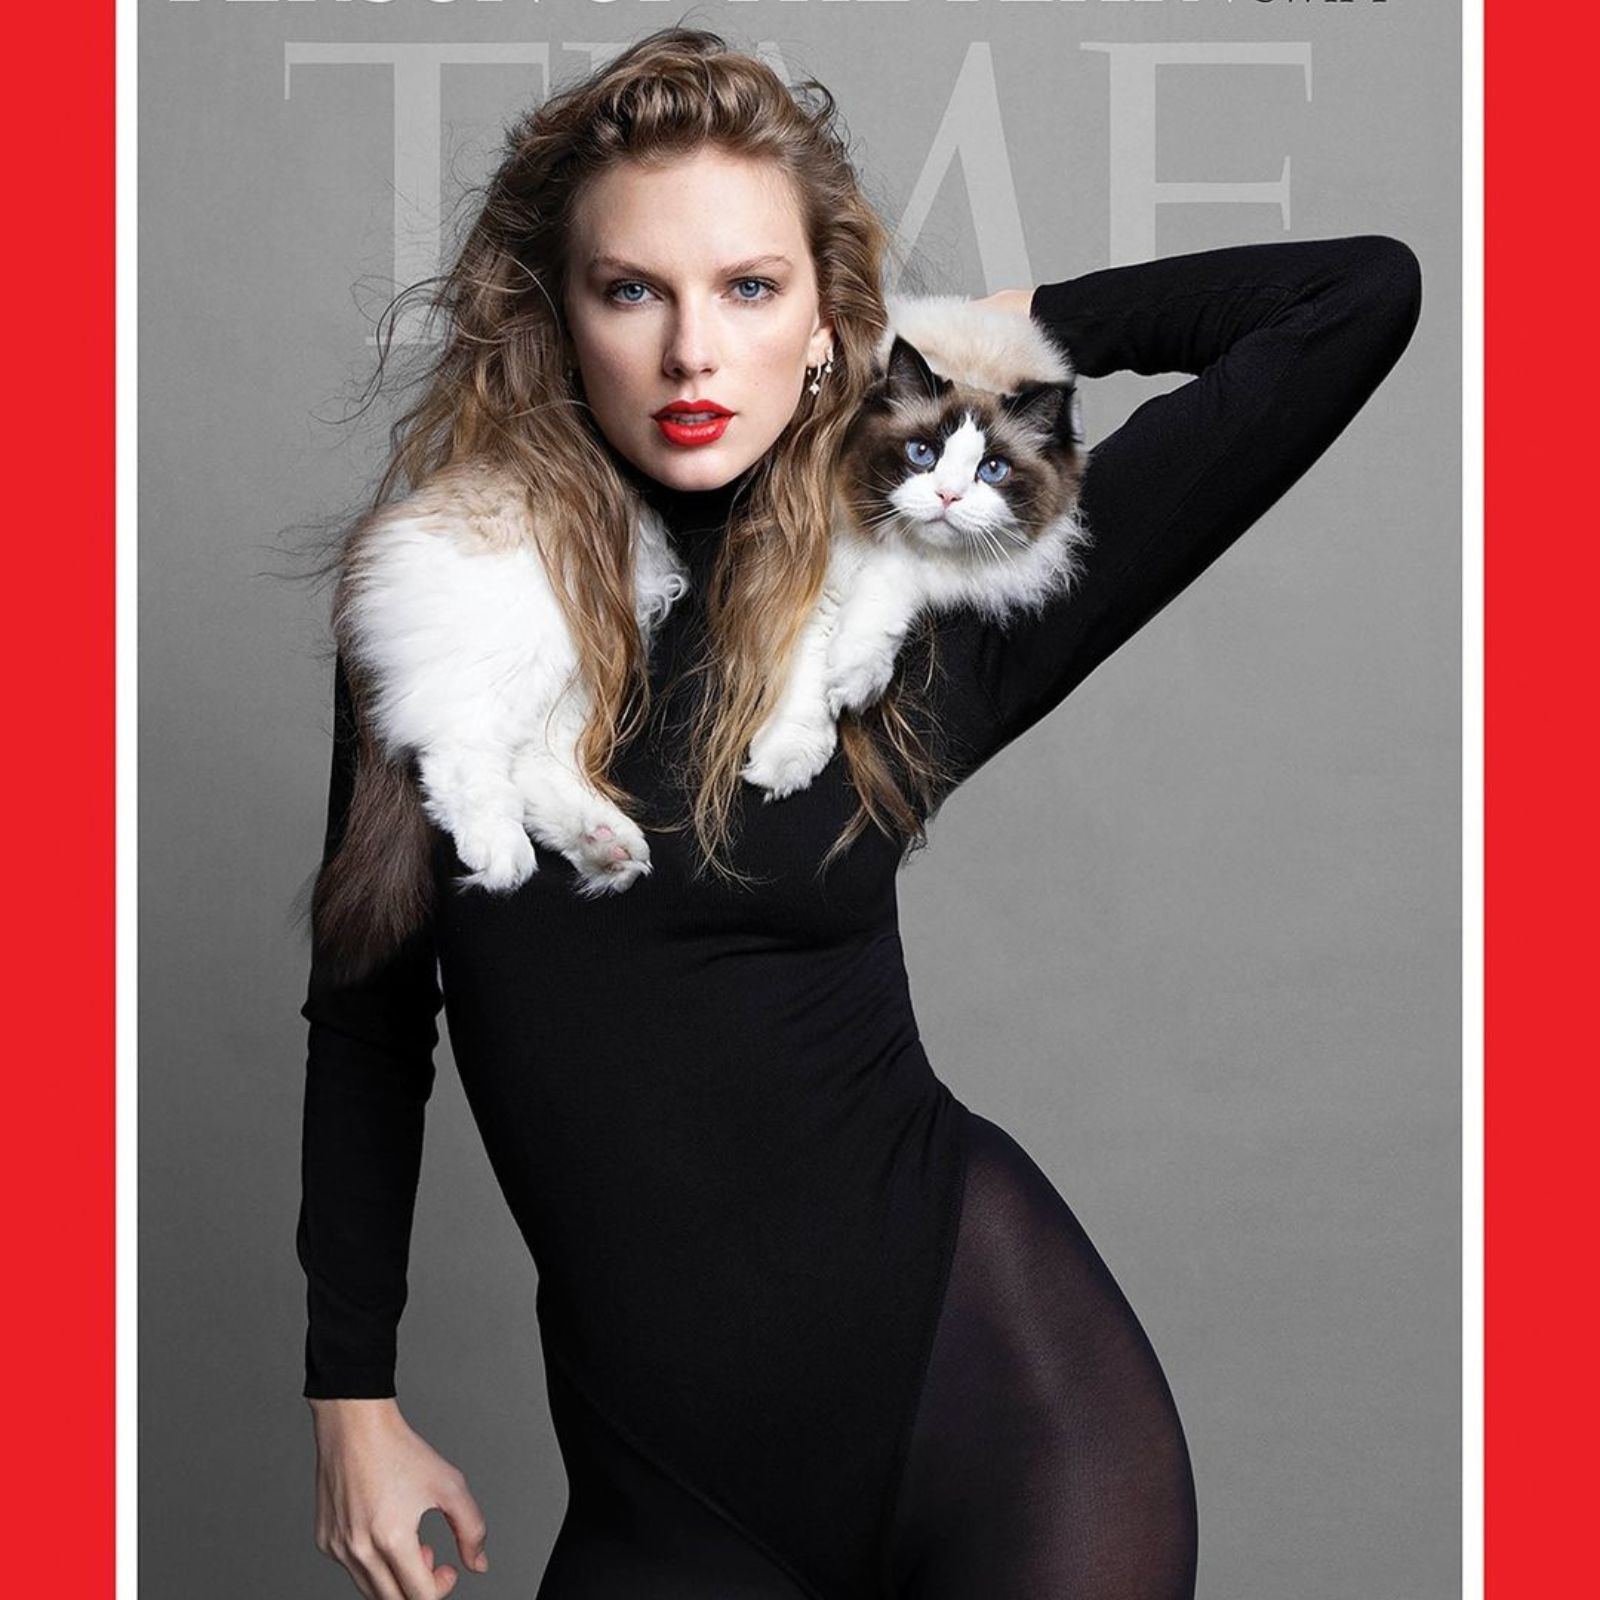 taylor swith with a cat on a cover of a magazine